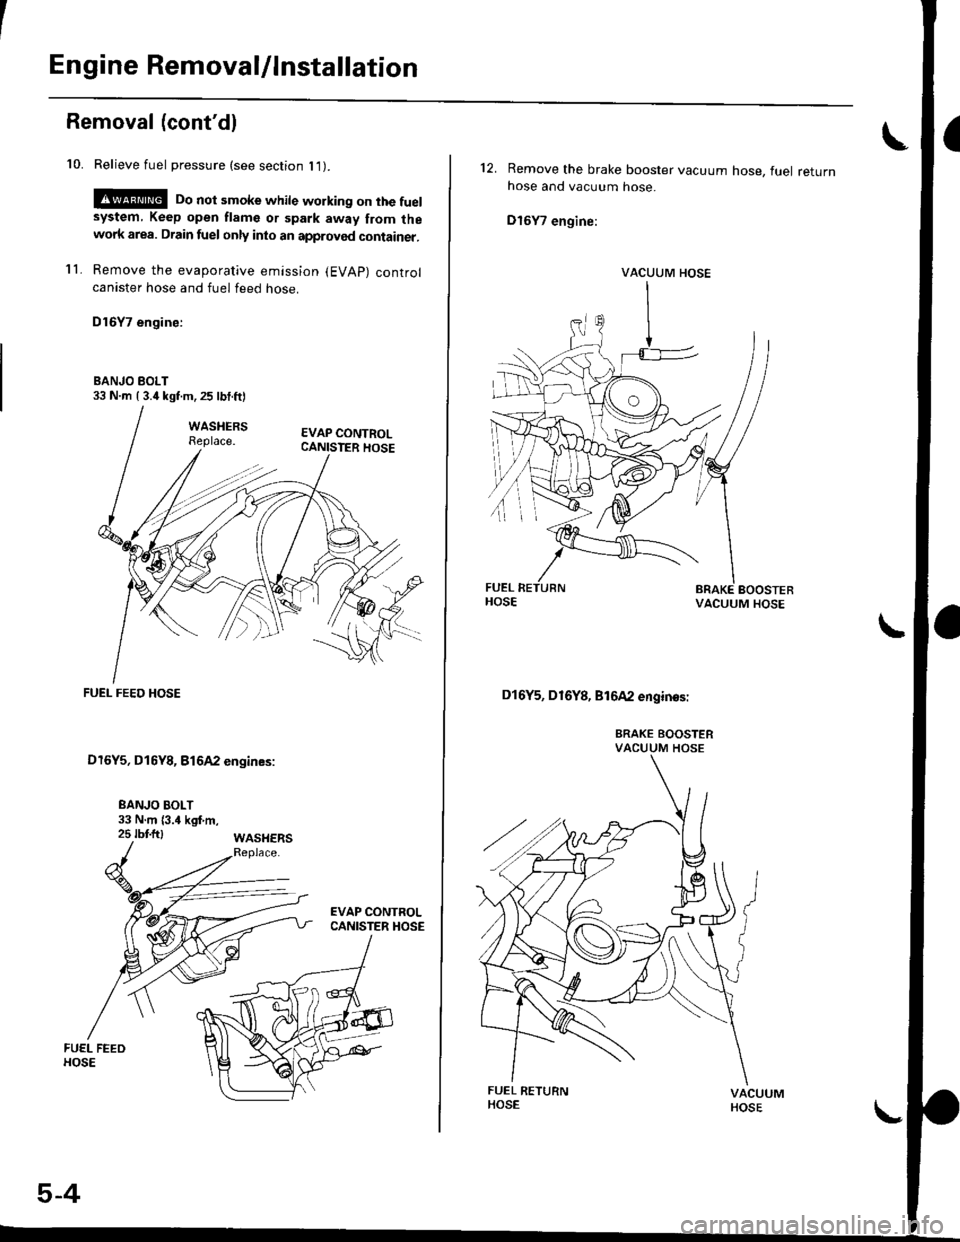 HONDA CIVIC 1997 6.G Service Manual Engine Removal/lnstallation
Removal (contdl
10. Relieve fuel pressure (see section l1).
!@ Do not smoke while working on the fuelsystem, Keep open flame or spark away from thewolk area. Drain fuel on